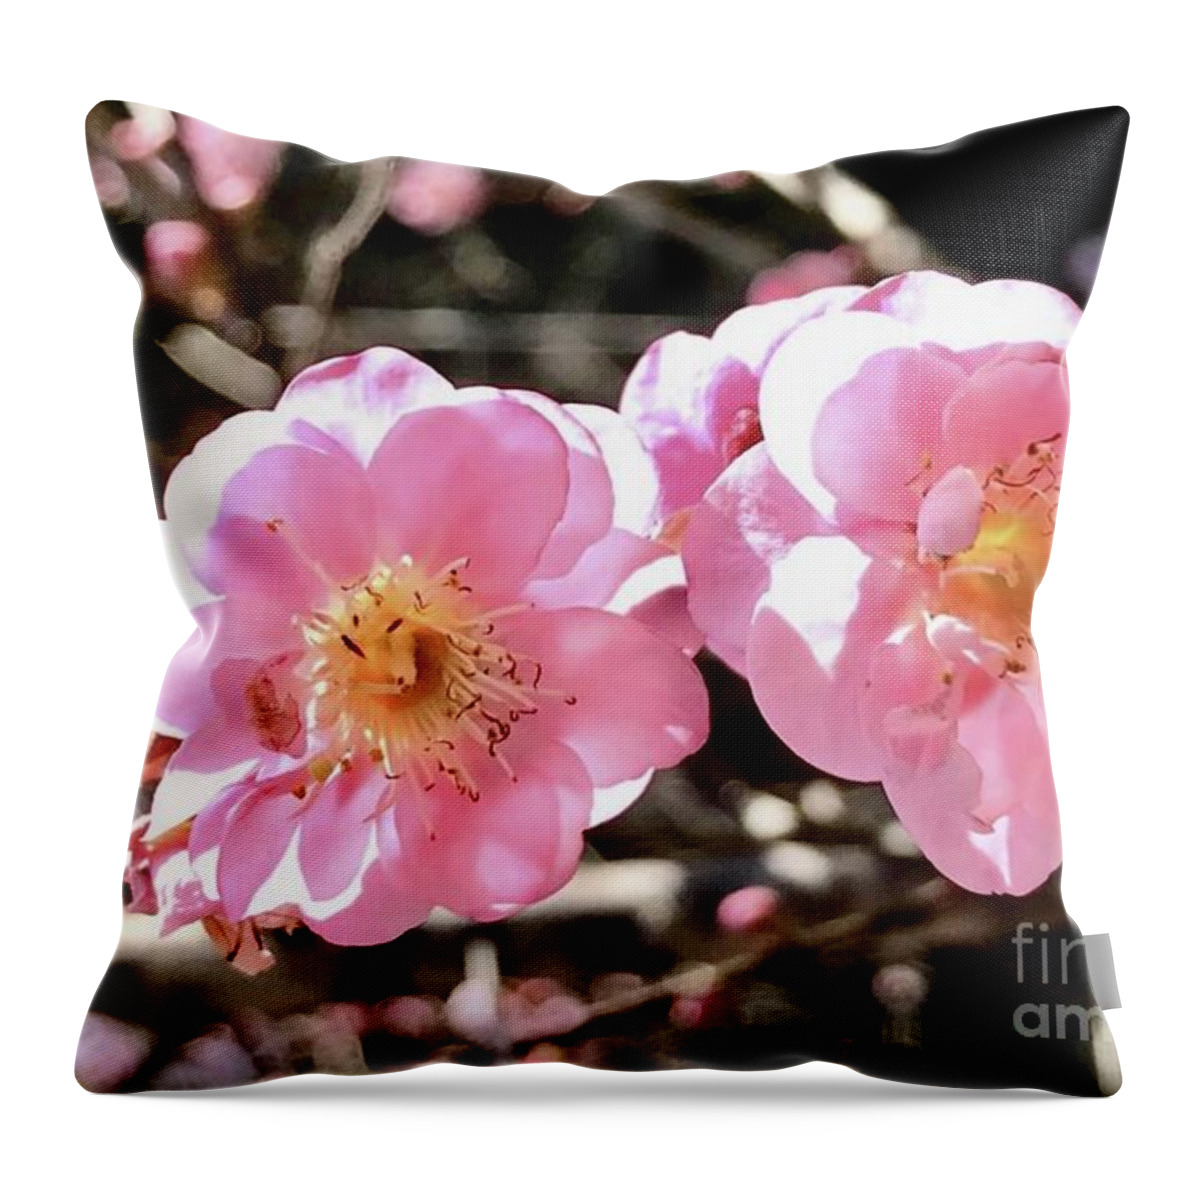 Plum Blossom Throw Pillow featuring the photograph Mutually Enlivening by Carmen Lam